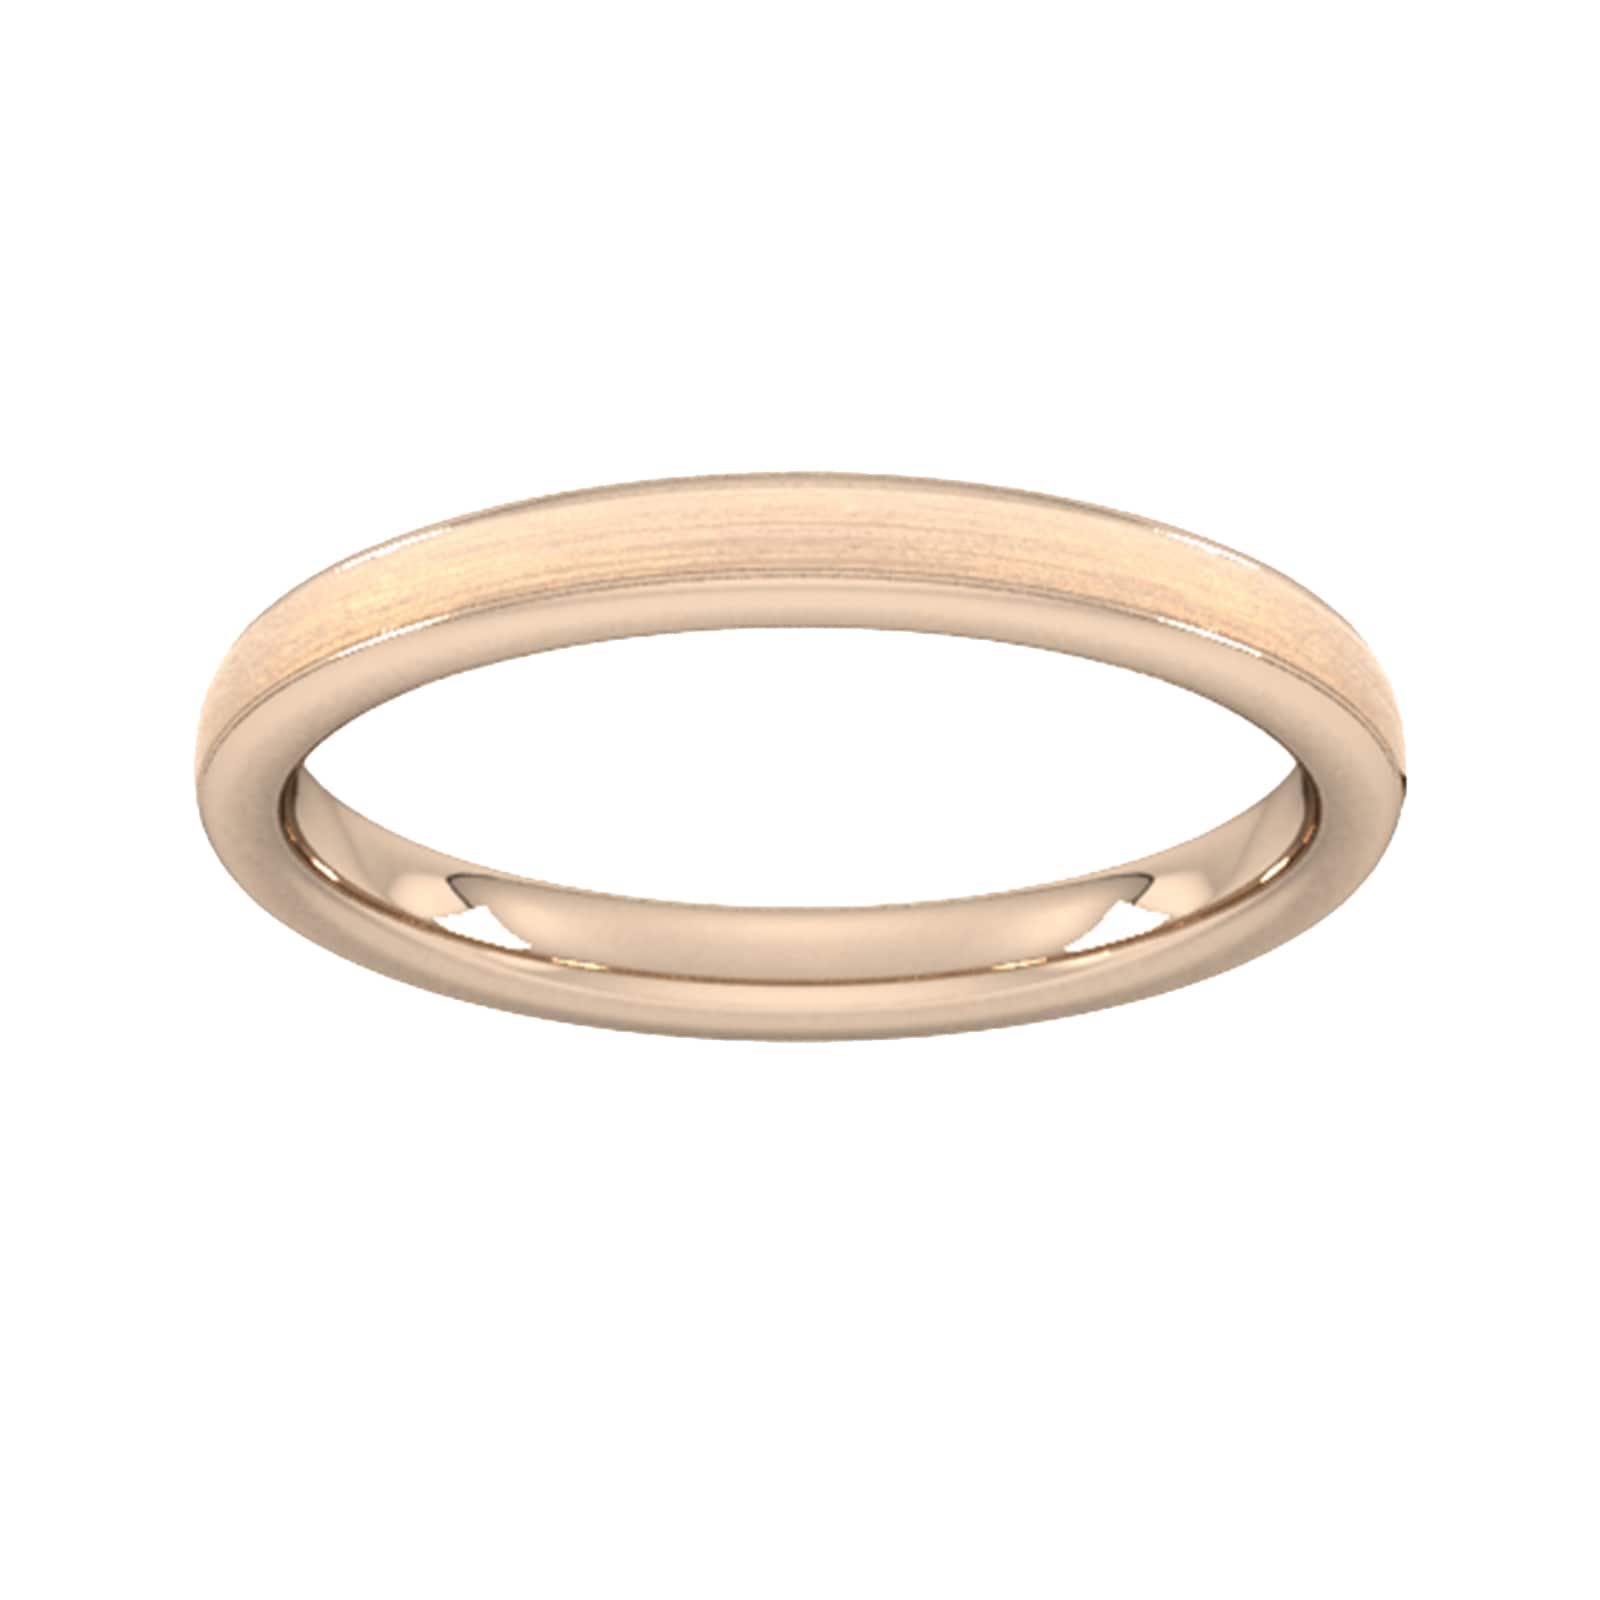 2.5mm traditional court heavy matt centre with grooves wedding ring in 18 carat rose gold - ring size l